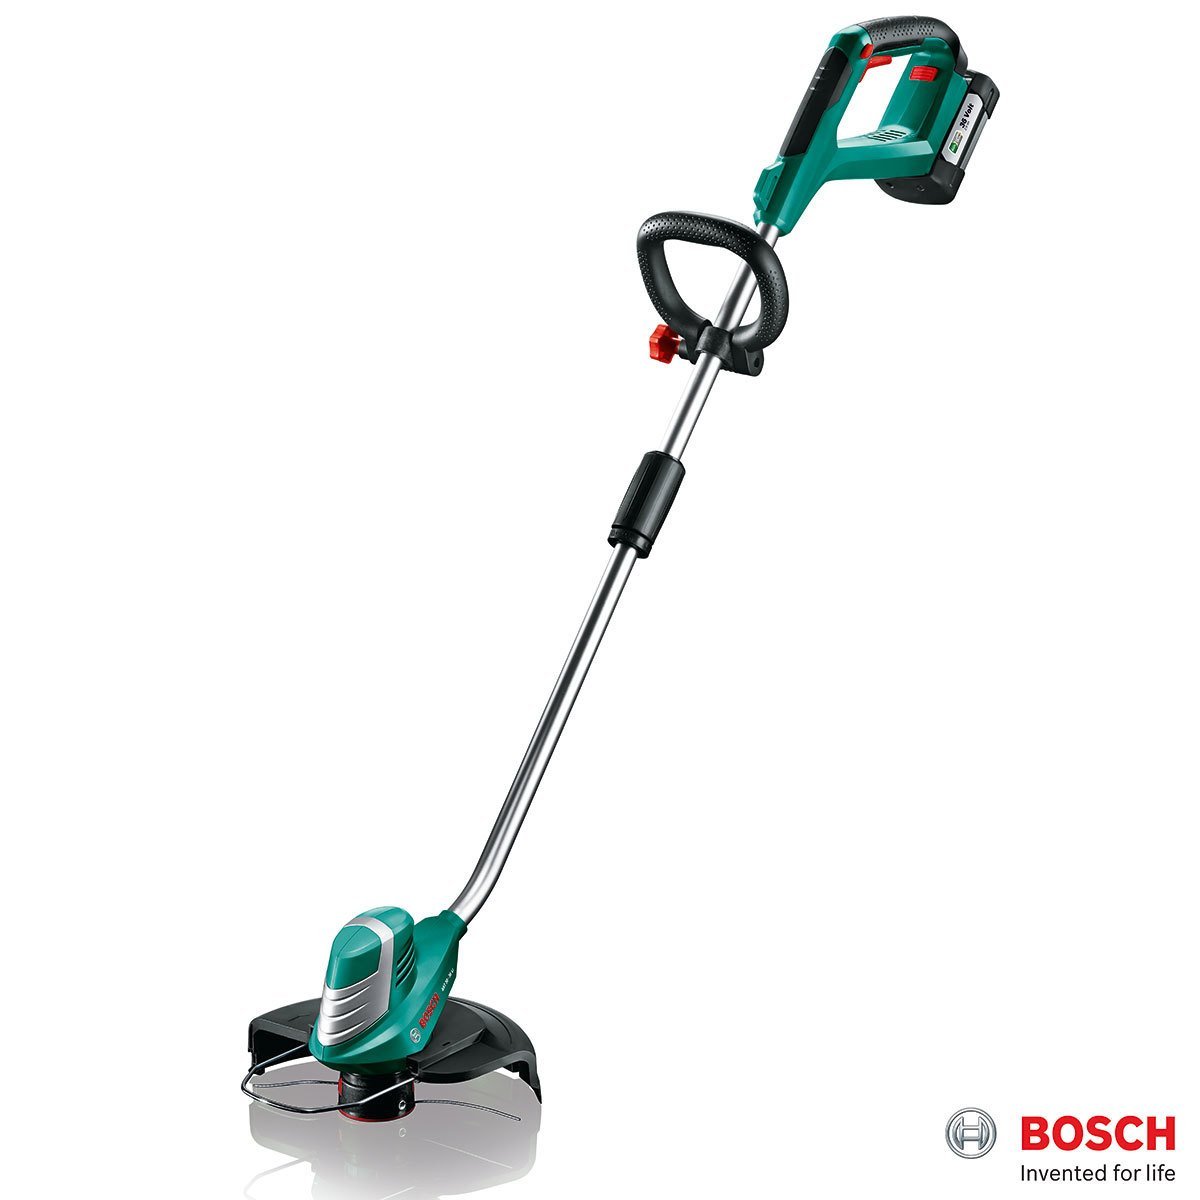 Bosch AdvancedGrassCut 36V Cordless Grass Trimmer With Battery & Charger - Signature Retail Stores